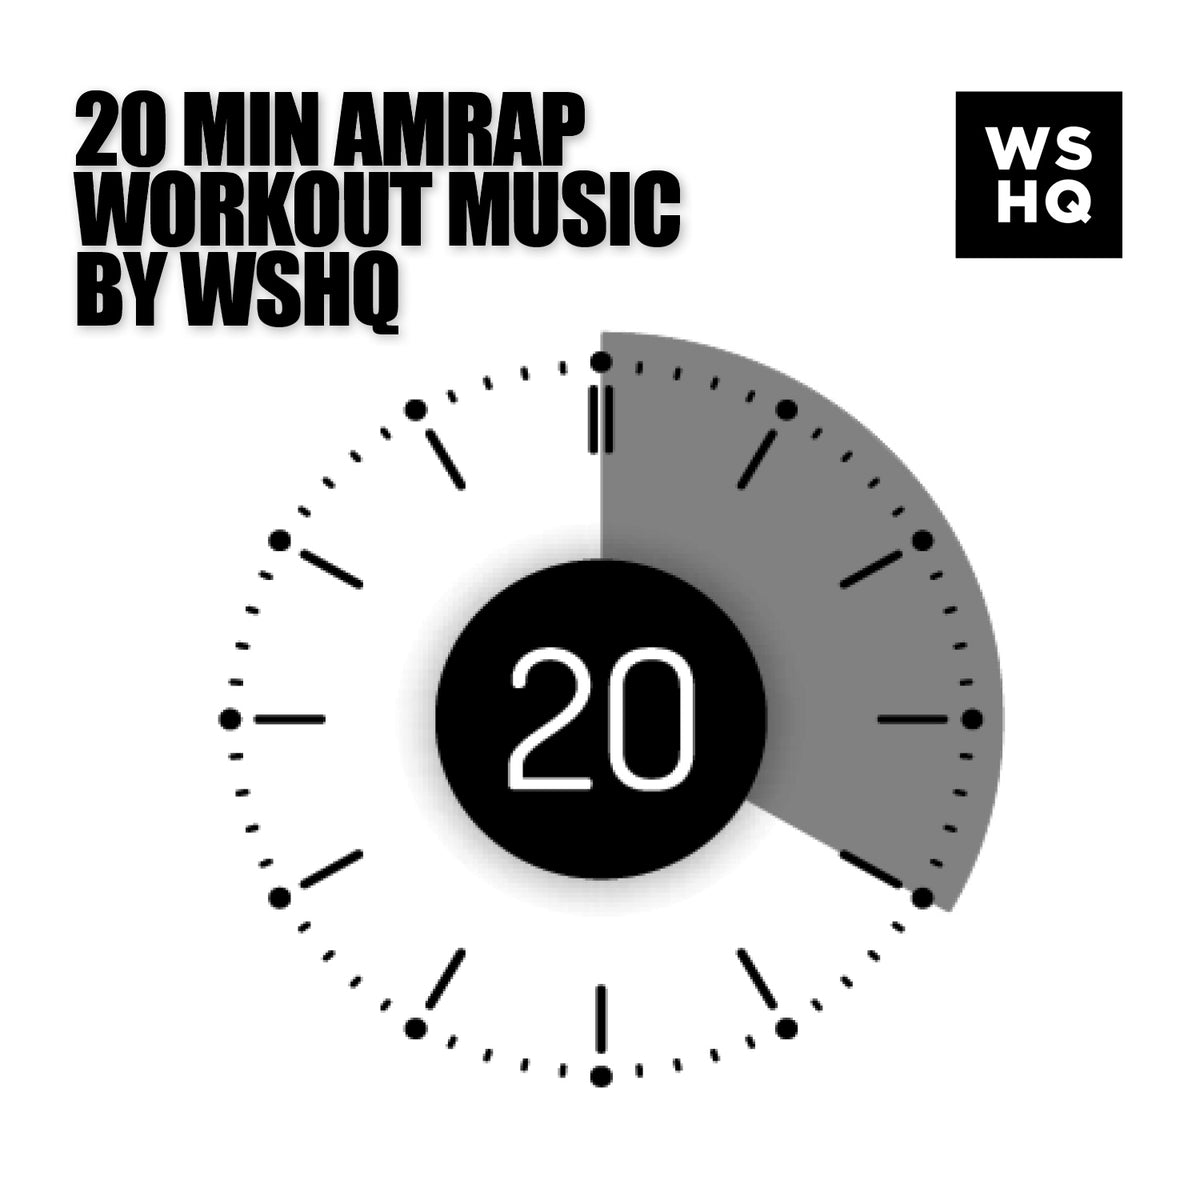 20 Minute Timer For AMRAP - Workout Music By WSHQ®